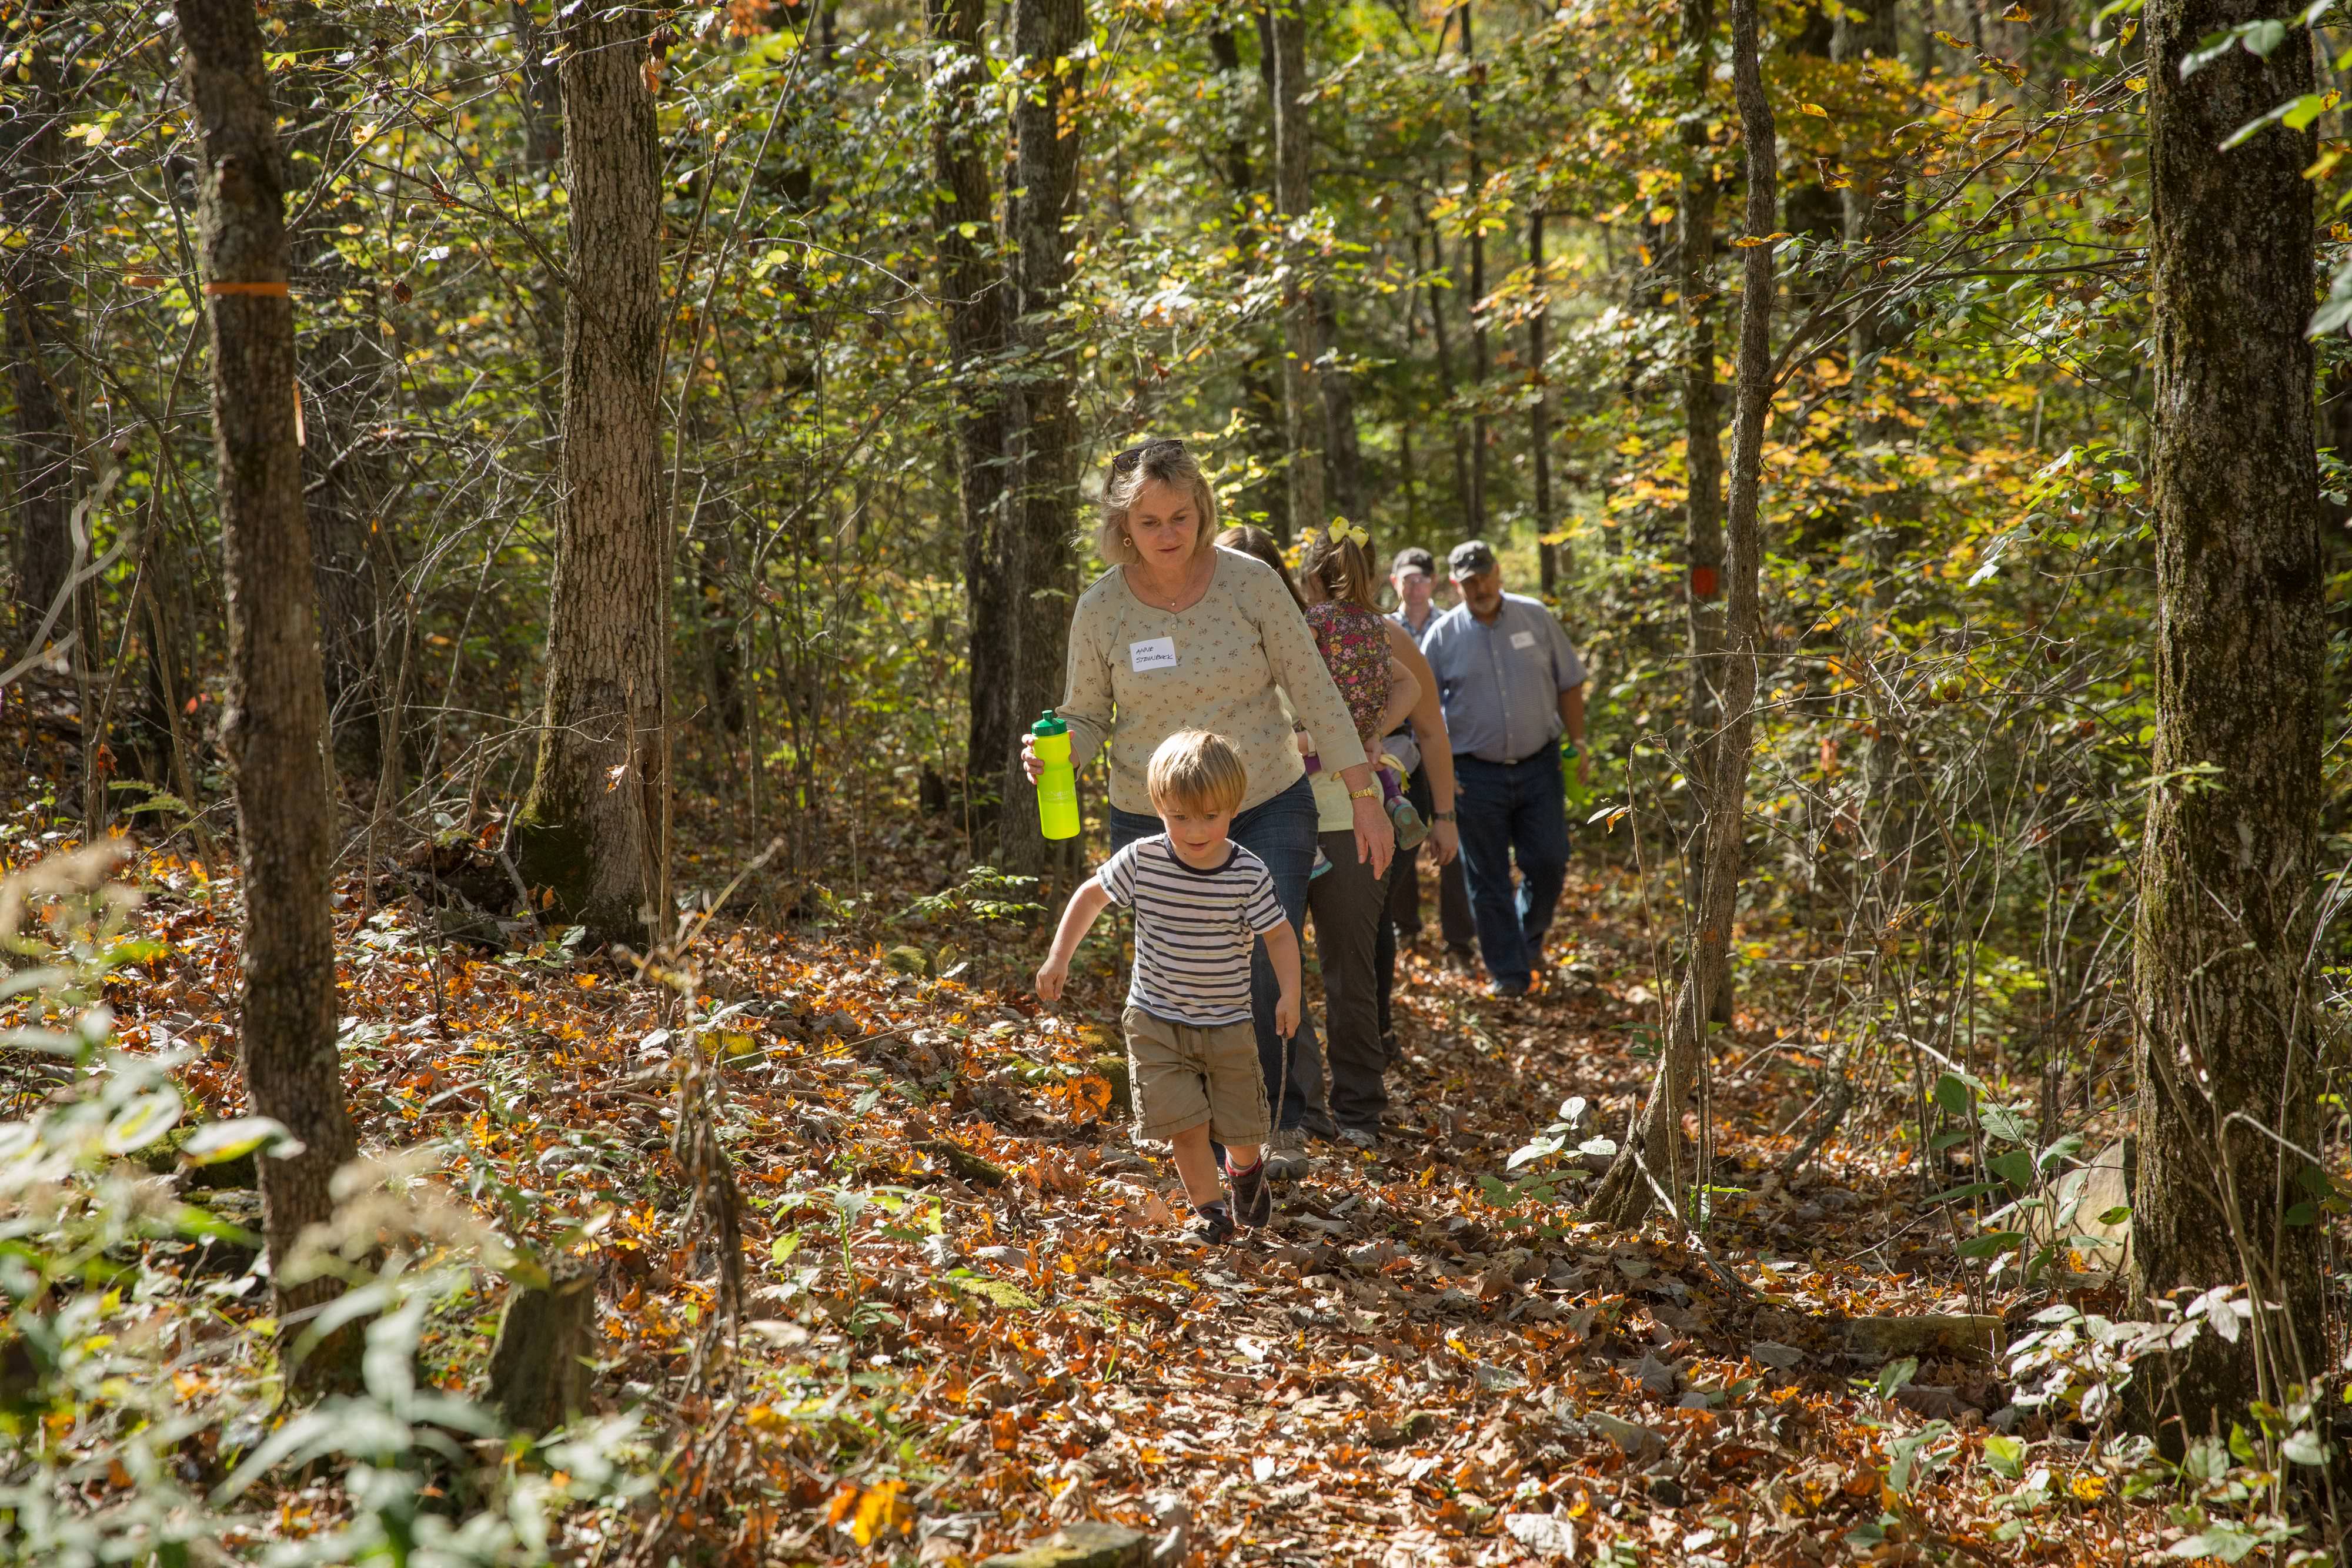 Led by a child, three people hike up a leafy trail surrounded by forest.